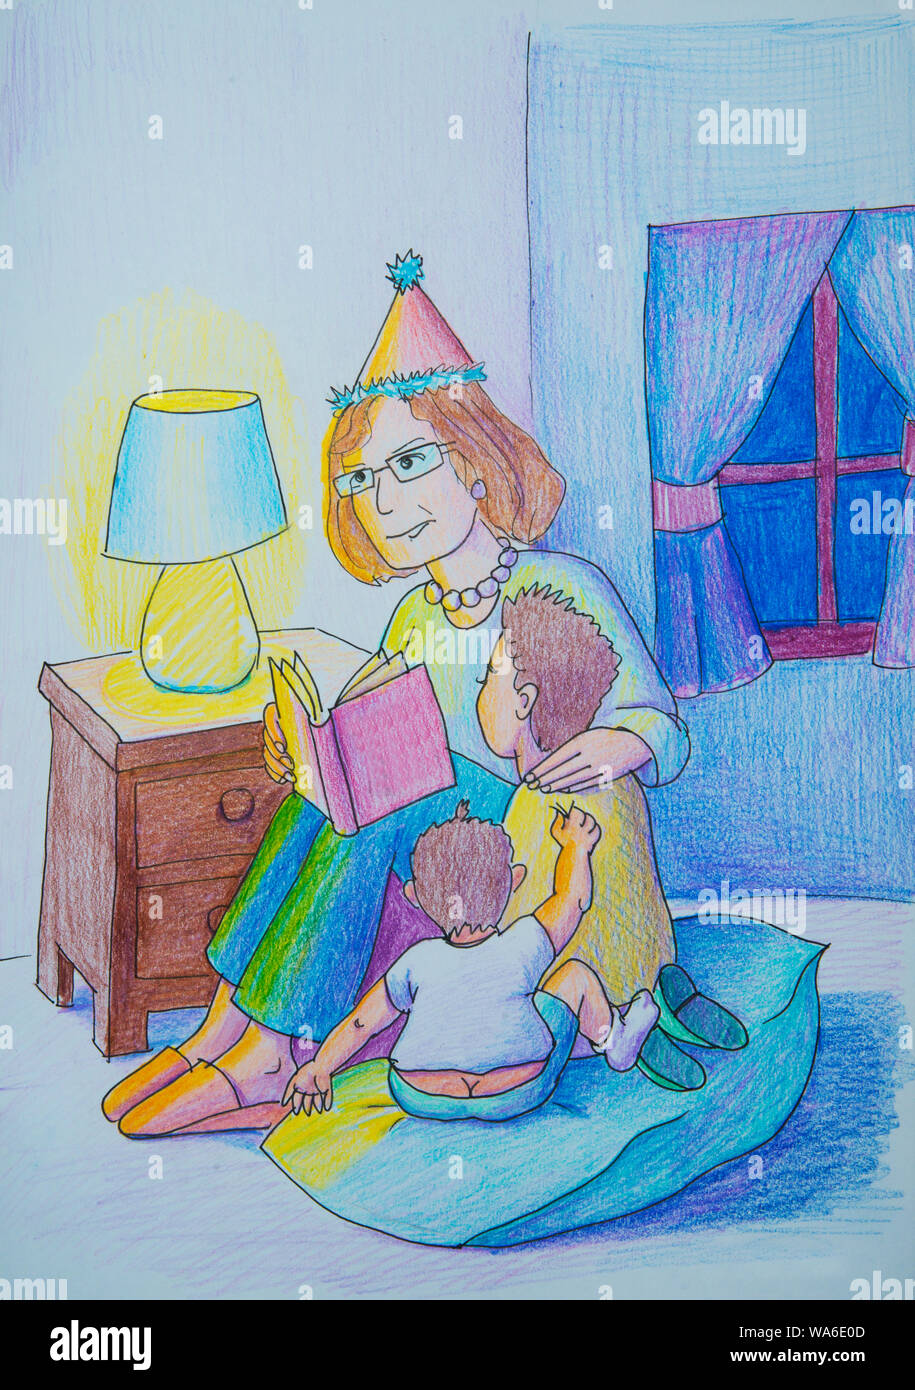 Woman reading her grandsons a book. Illustration. Stock Photo